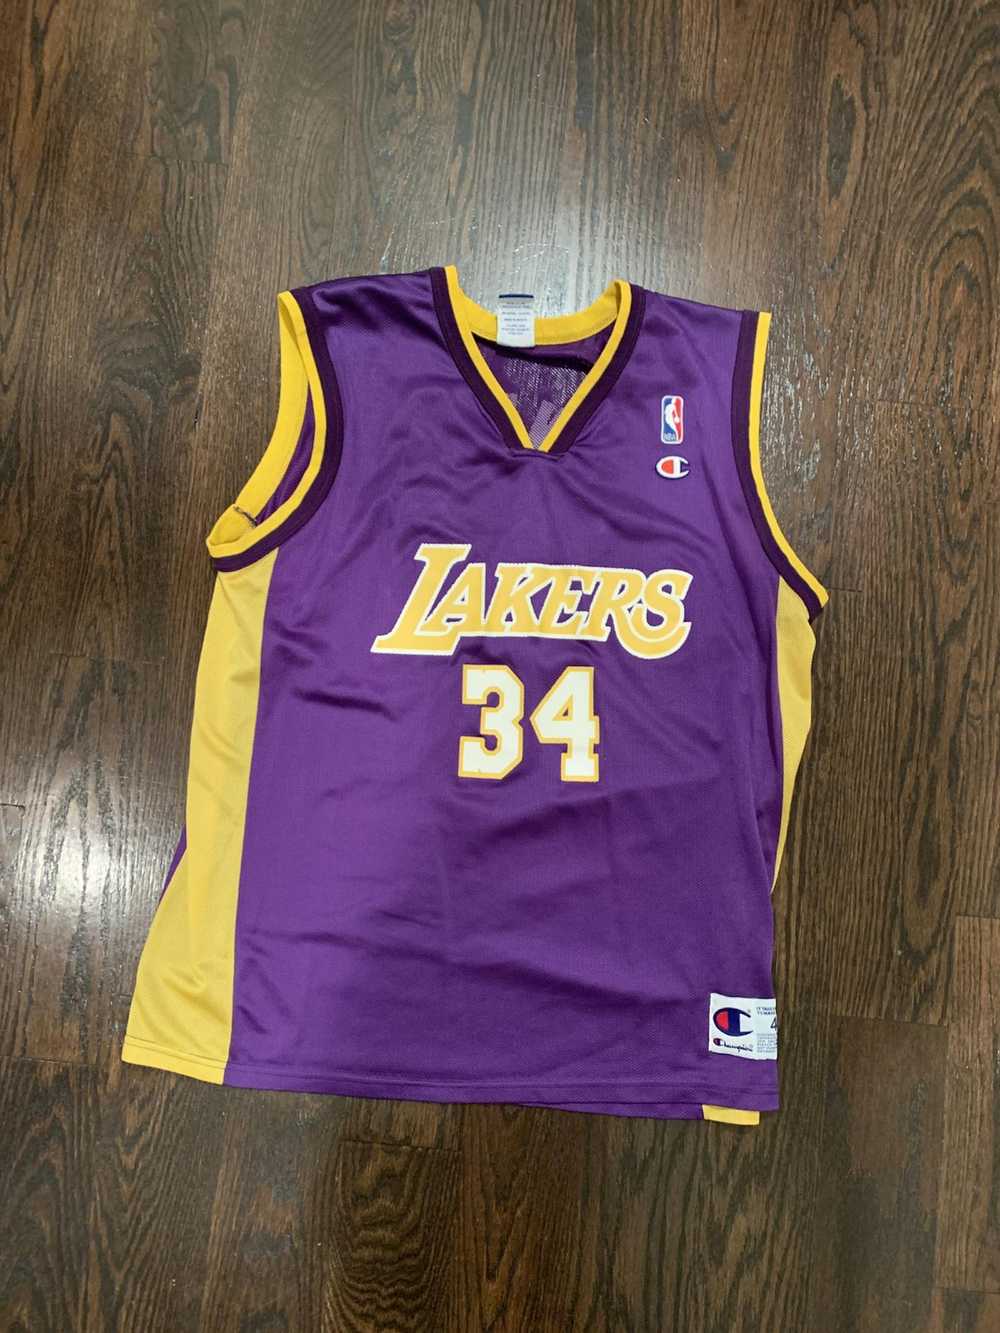 NBA Shaquille O’Neal Lakers Jersey - image 1